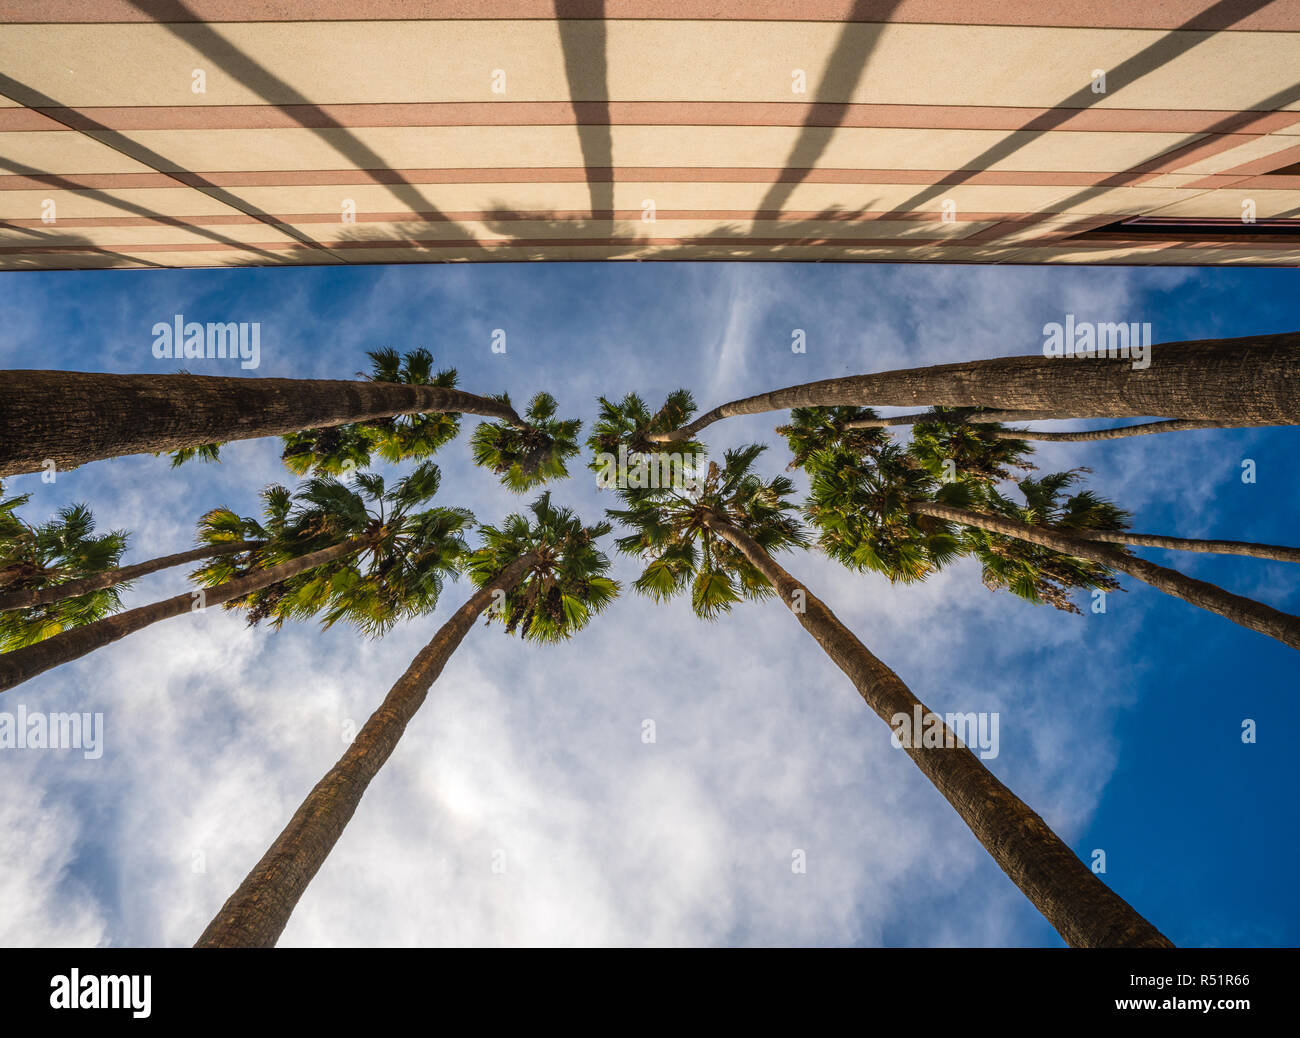 Tall palm trees against a blue sky and parking structure in Southern California. Stock Photo